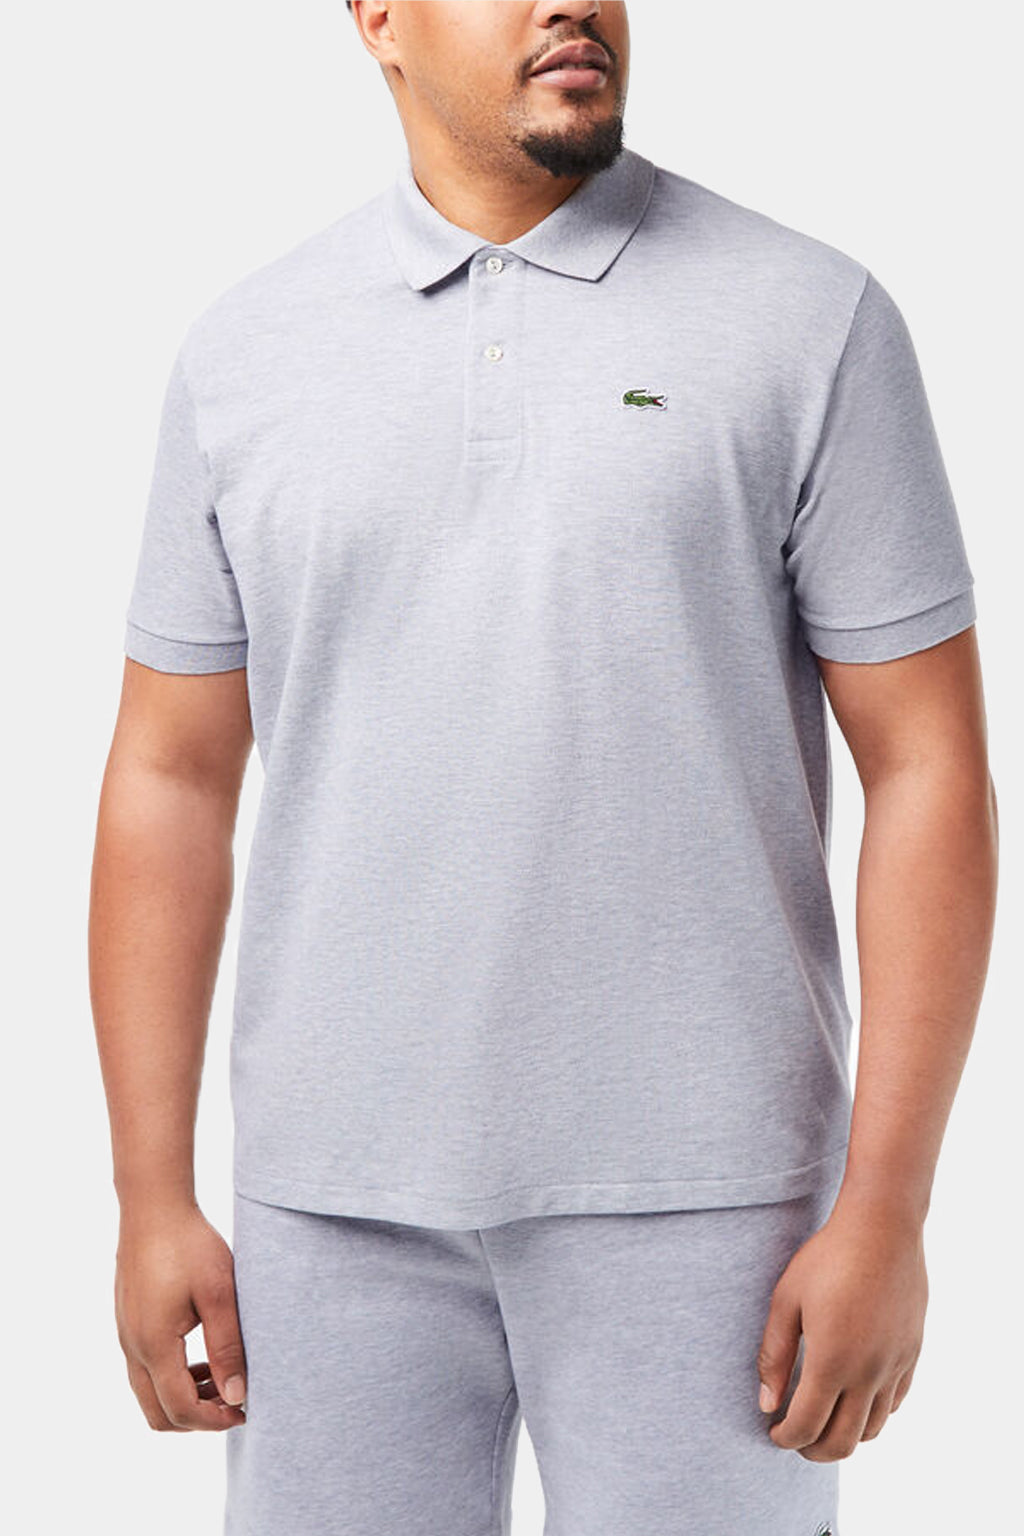 Lacoste - Marl Lacoste Classic Fit L.12.12 Polo Shirt